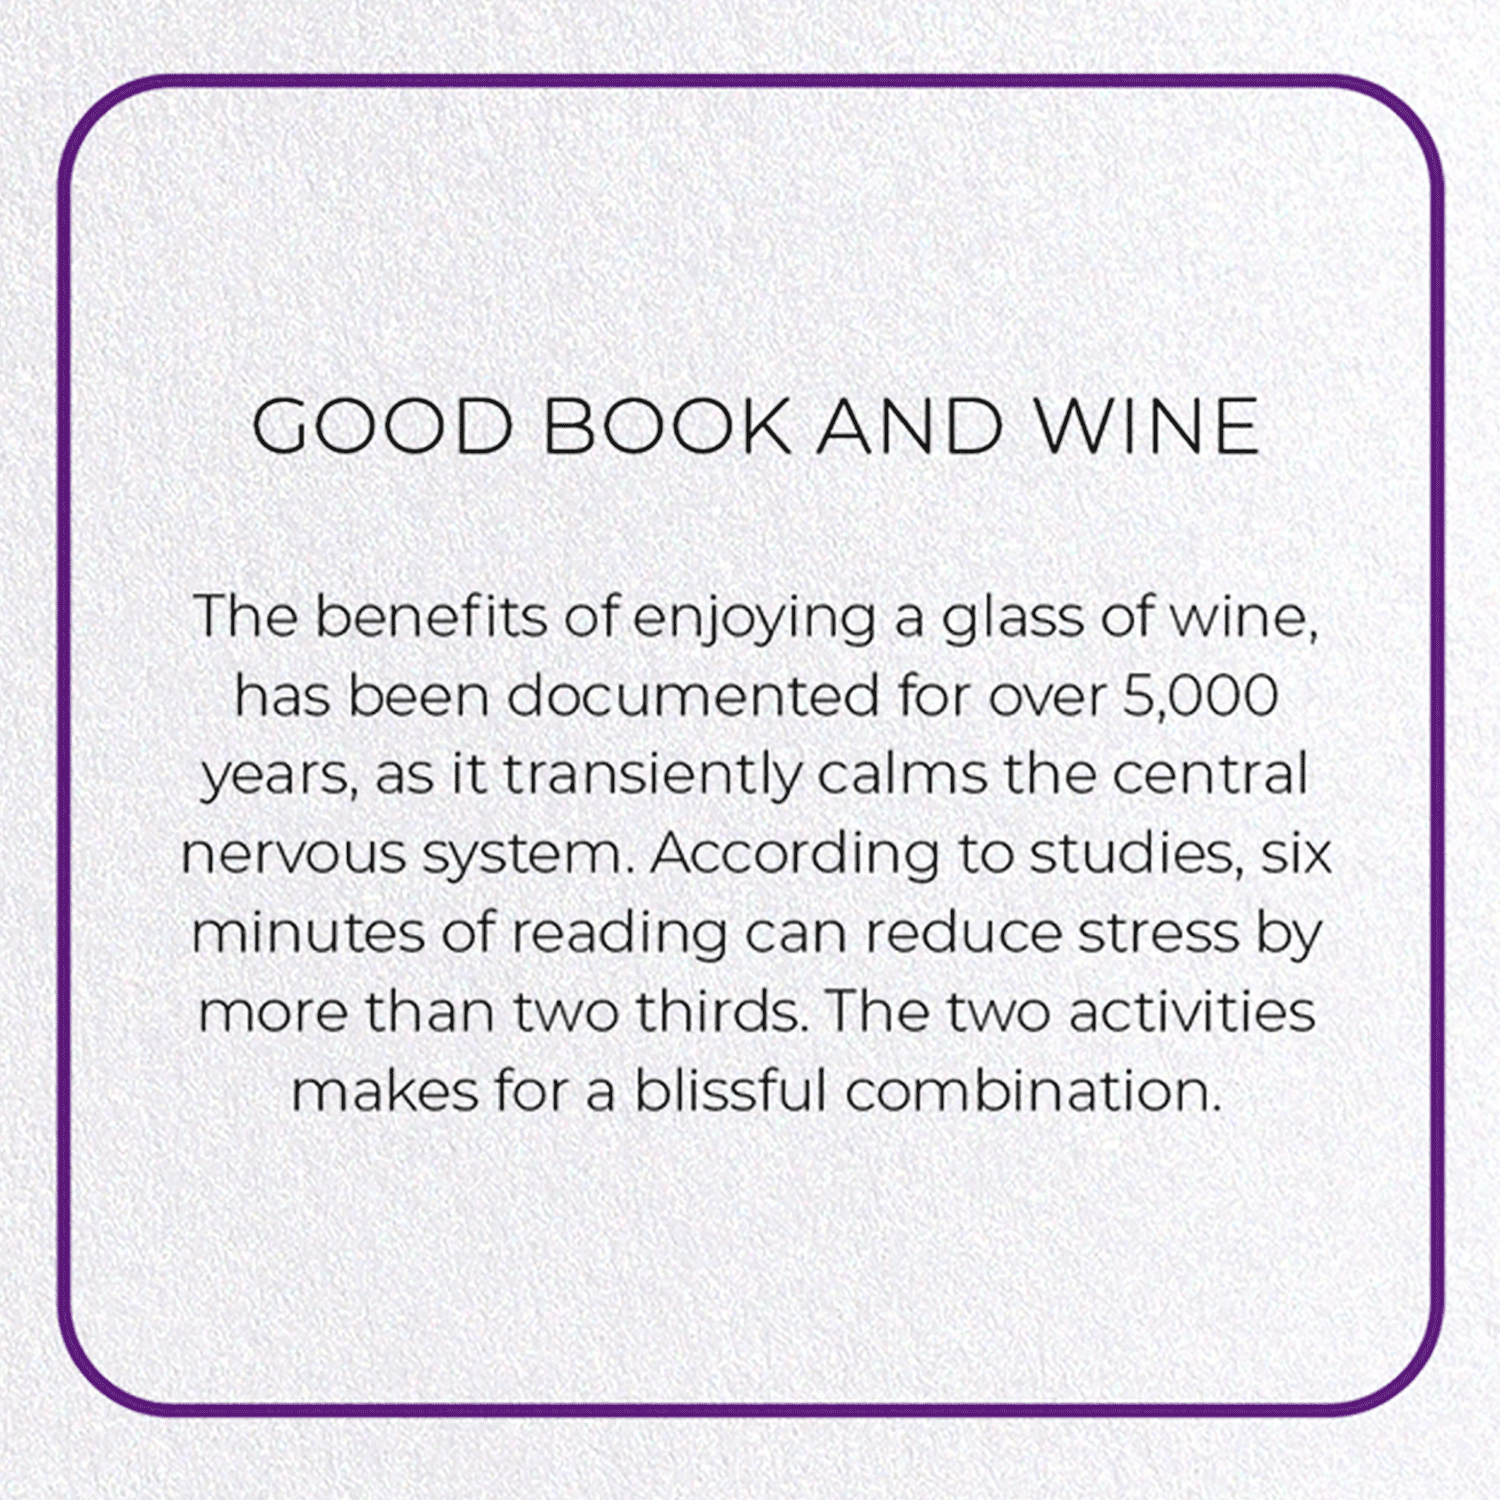 GOOD BOOK AND WINE: Photo Greeting Card